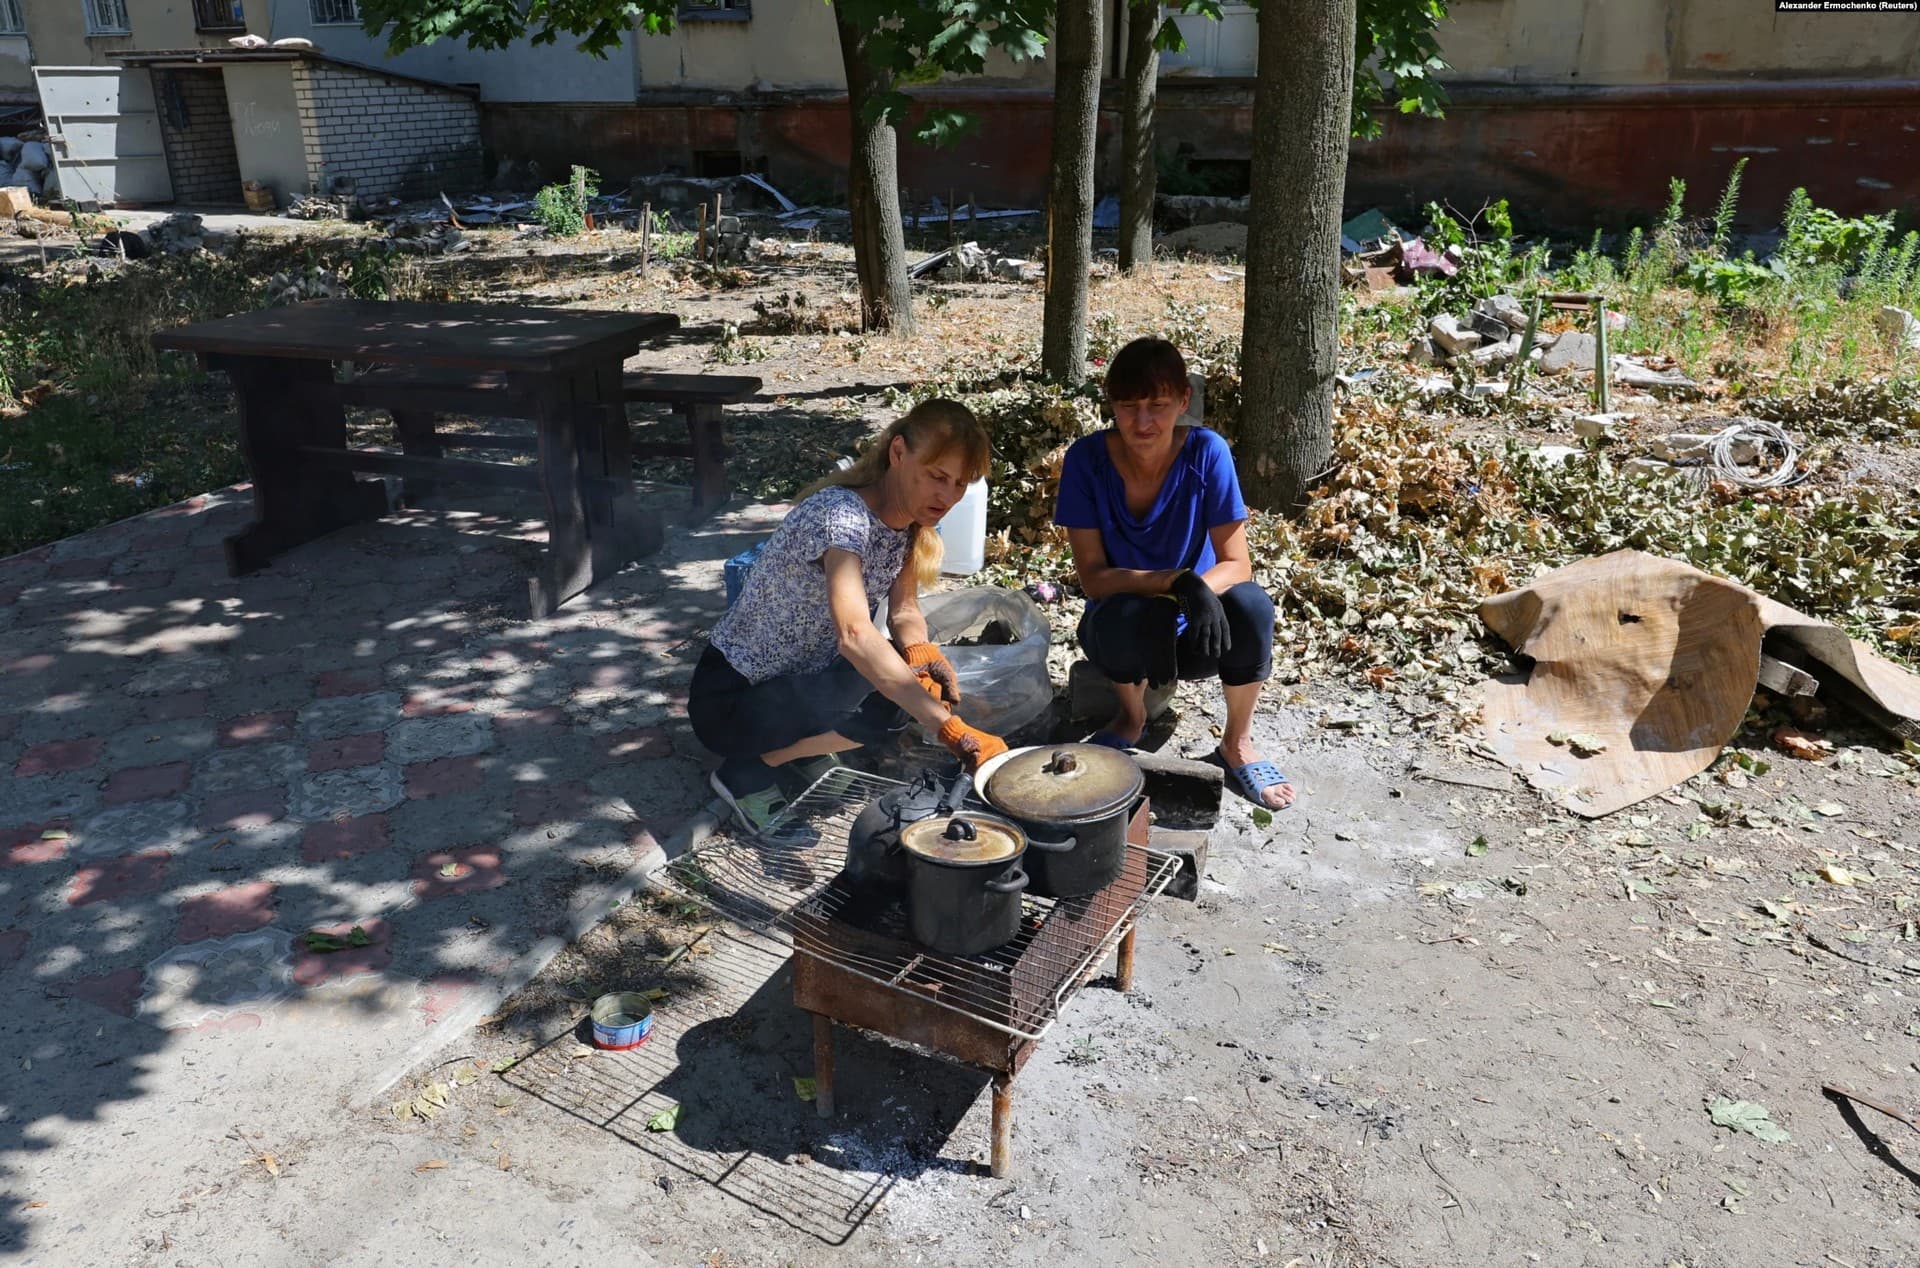 Local residents cook food on an open fire